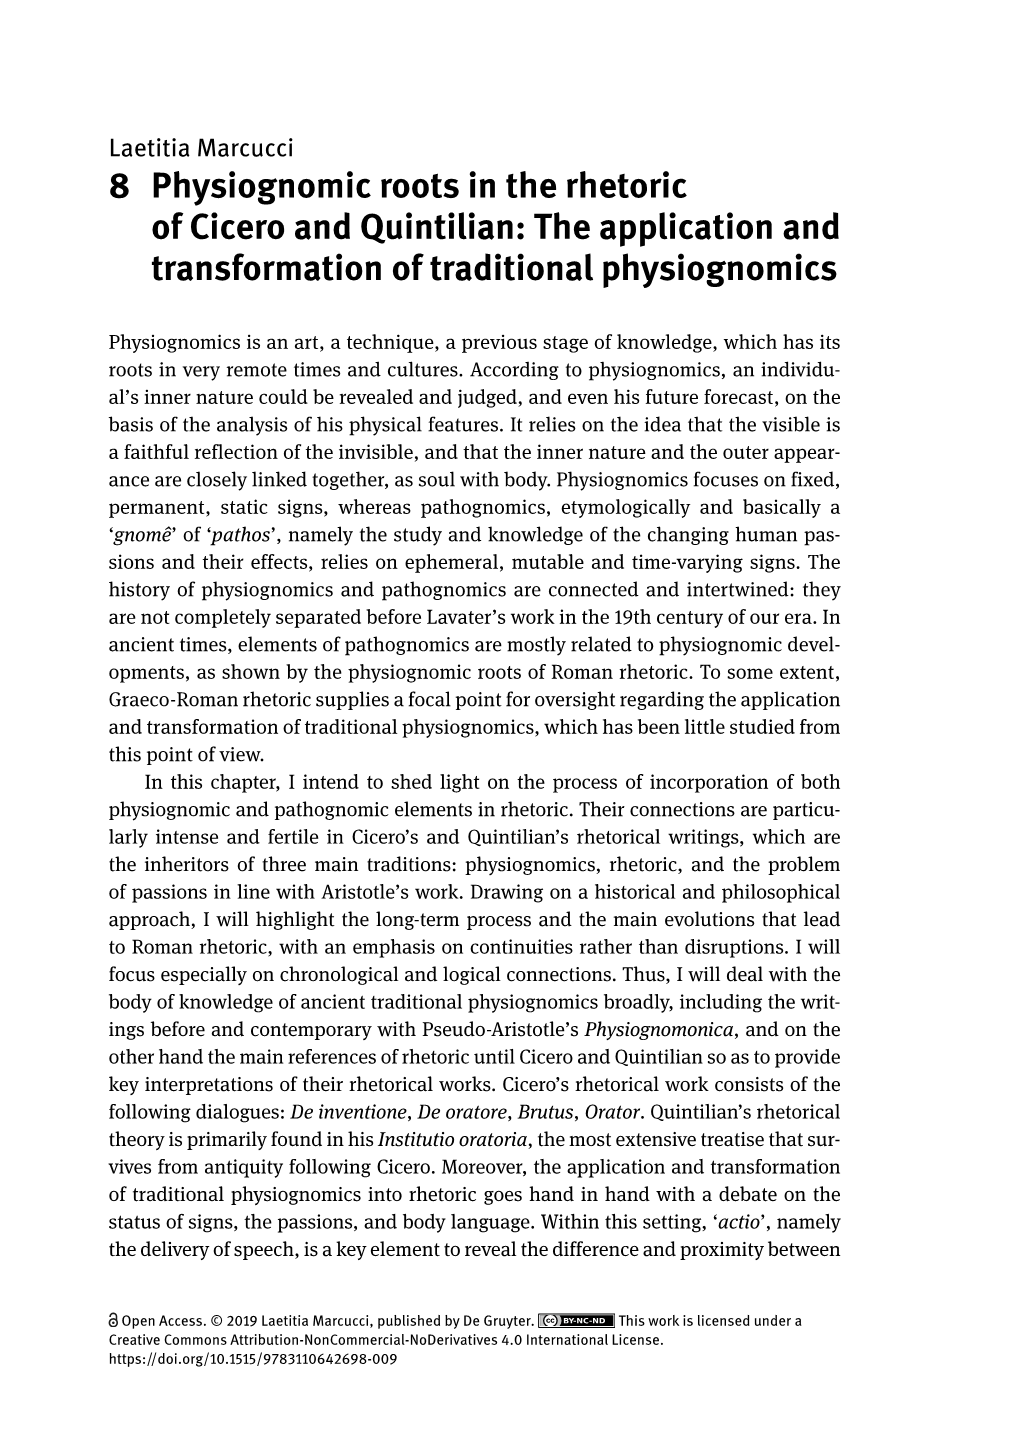 8 Physiognomic Roots in the Rhetoric of Cicero and Quintilian: the Application and Transformation of Traditional Physiognomics